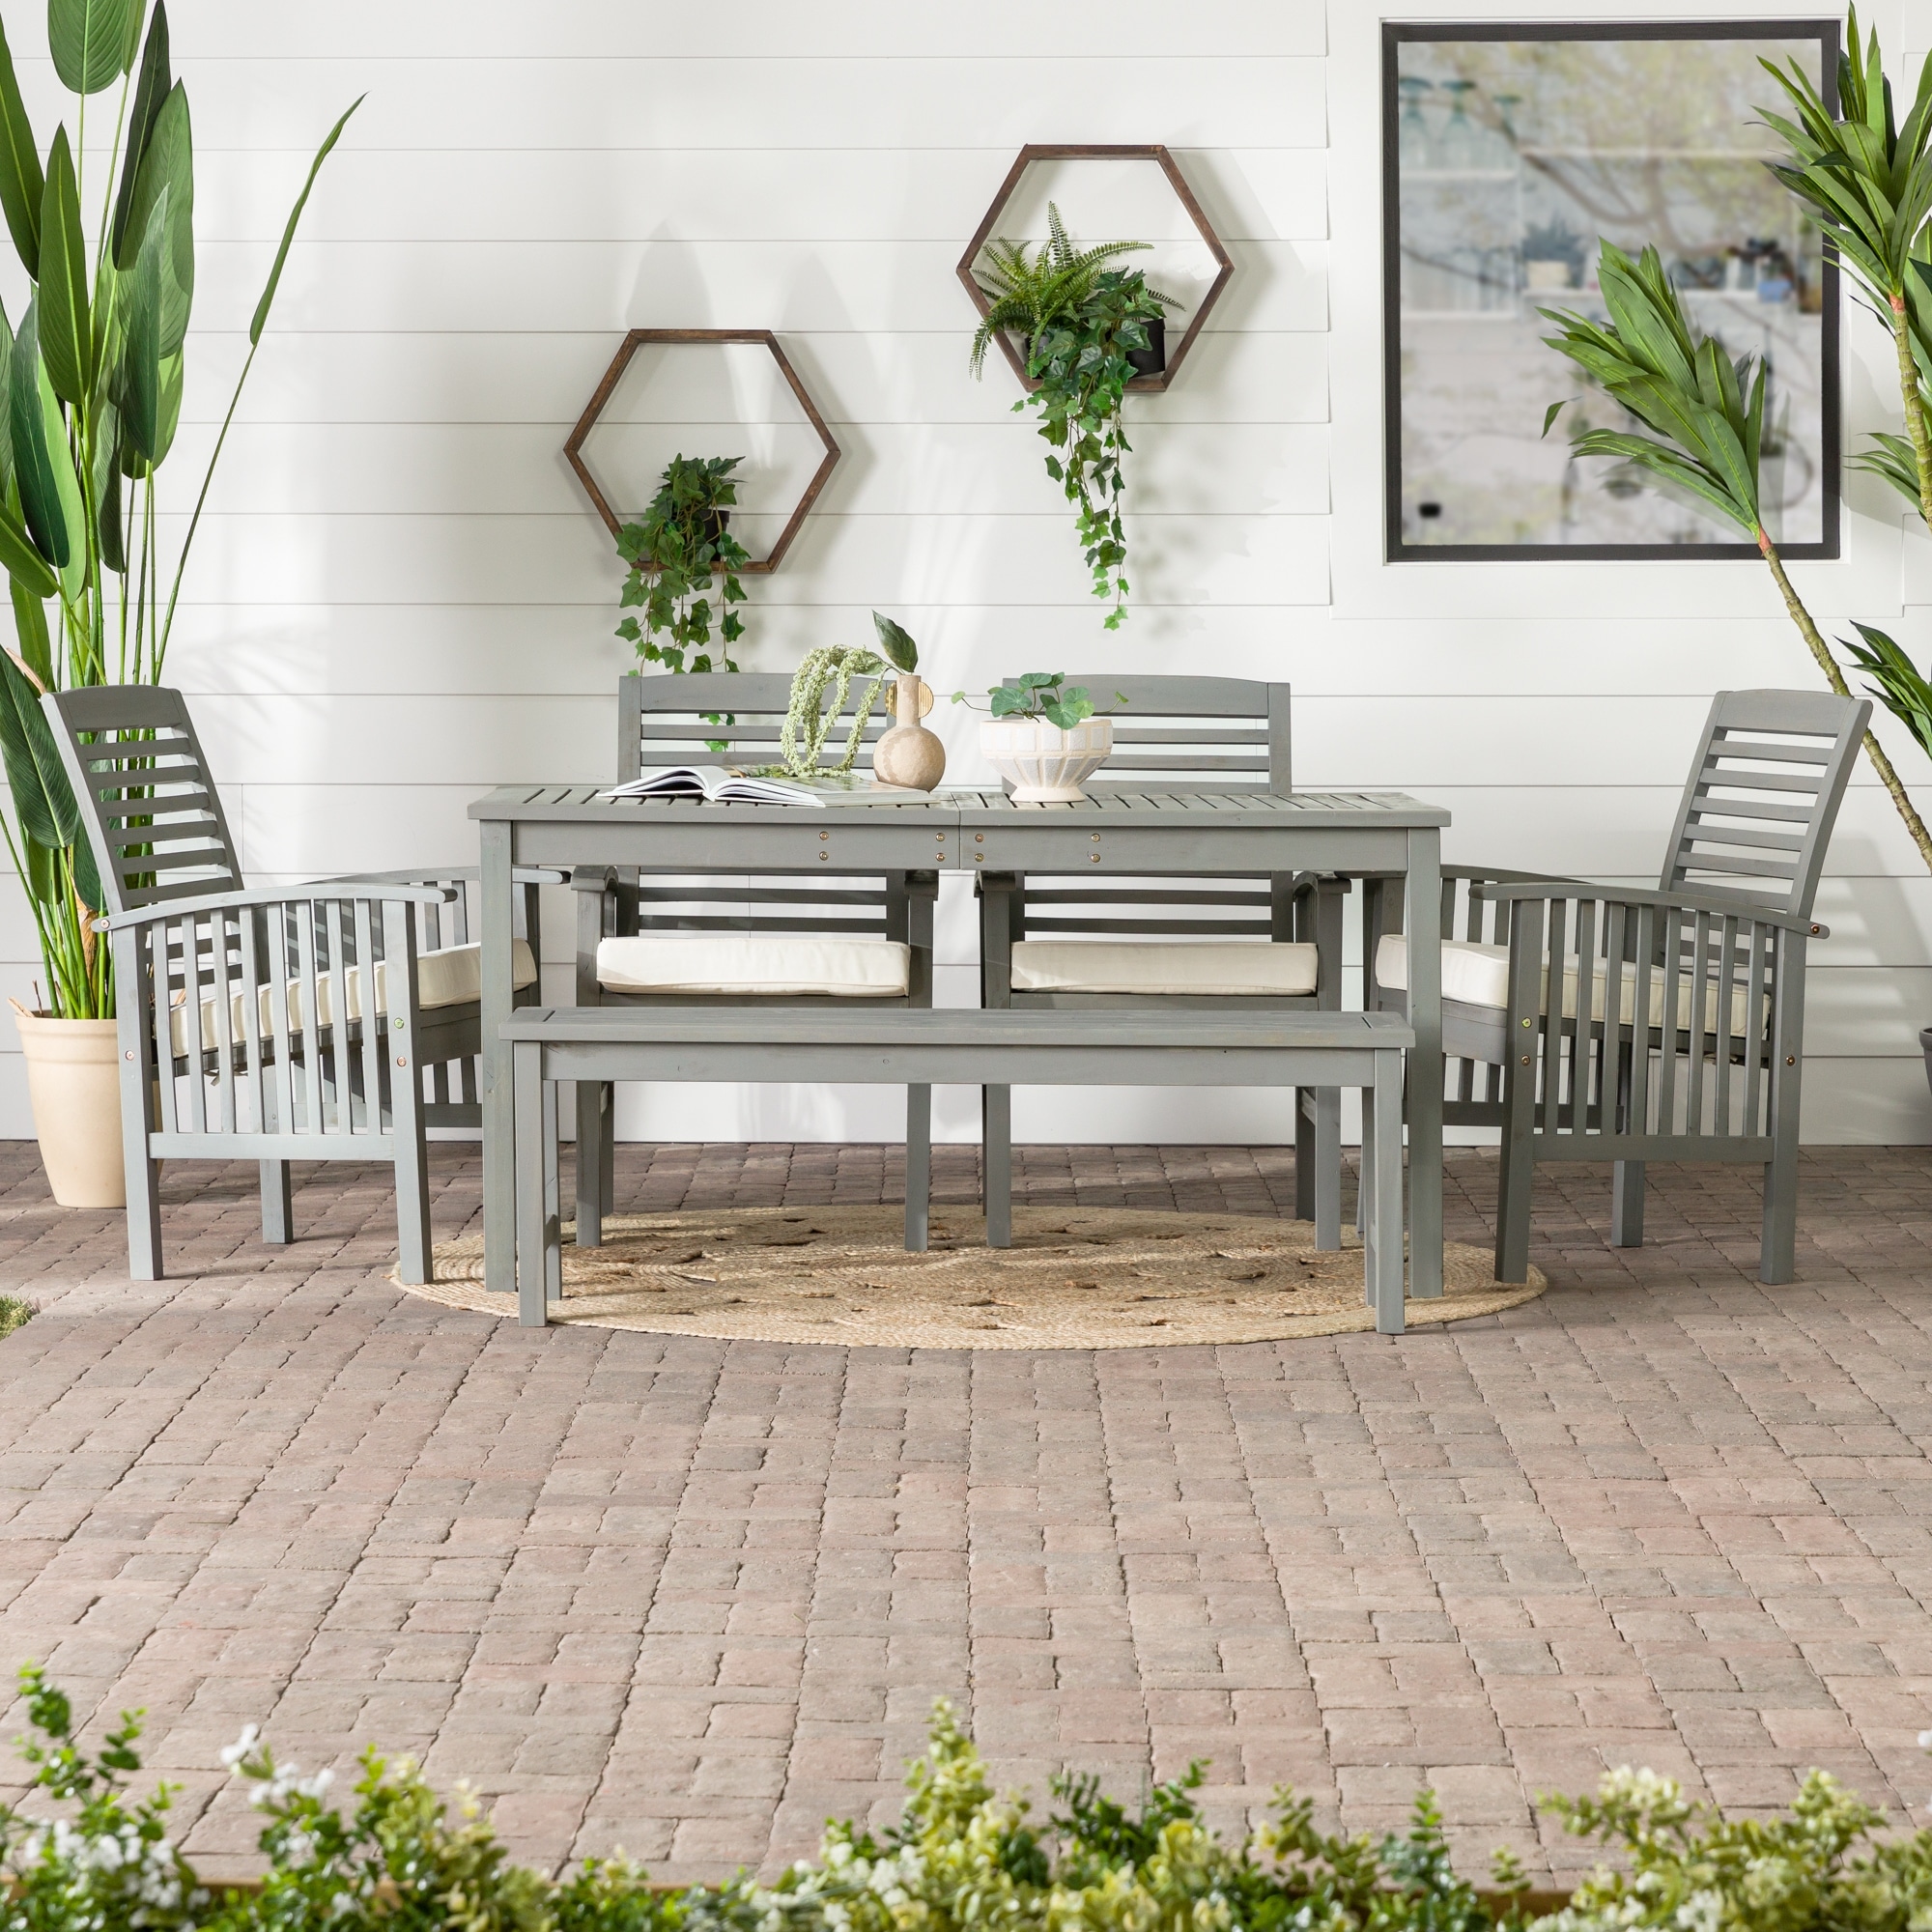 Middlebrook Surfside 6-piece Acacia Wood Outdoor Dining Set